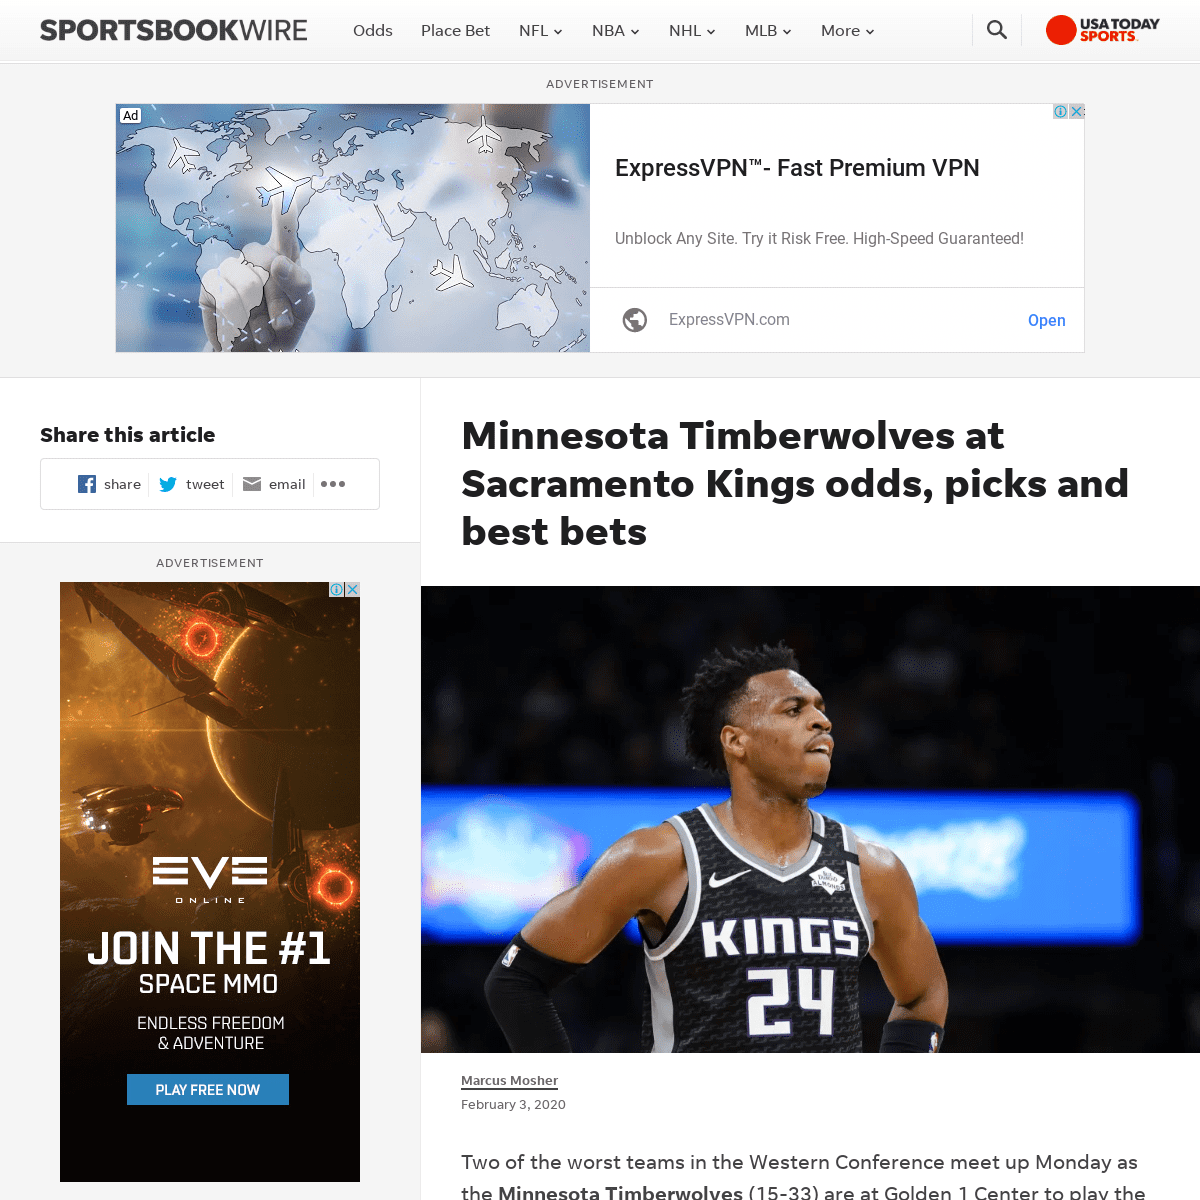 A complete backup of sportsbookwire.usatoday.com/2020/02/03/minnesota-timberwolves-at-sacramento-kings-odds-picks-and-best-bets/